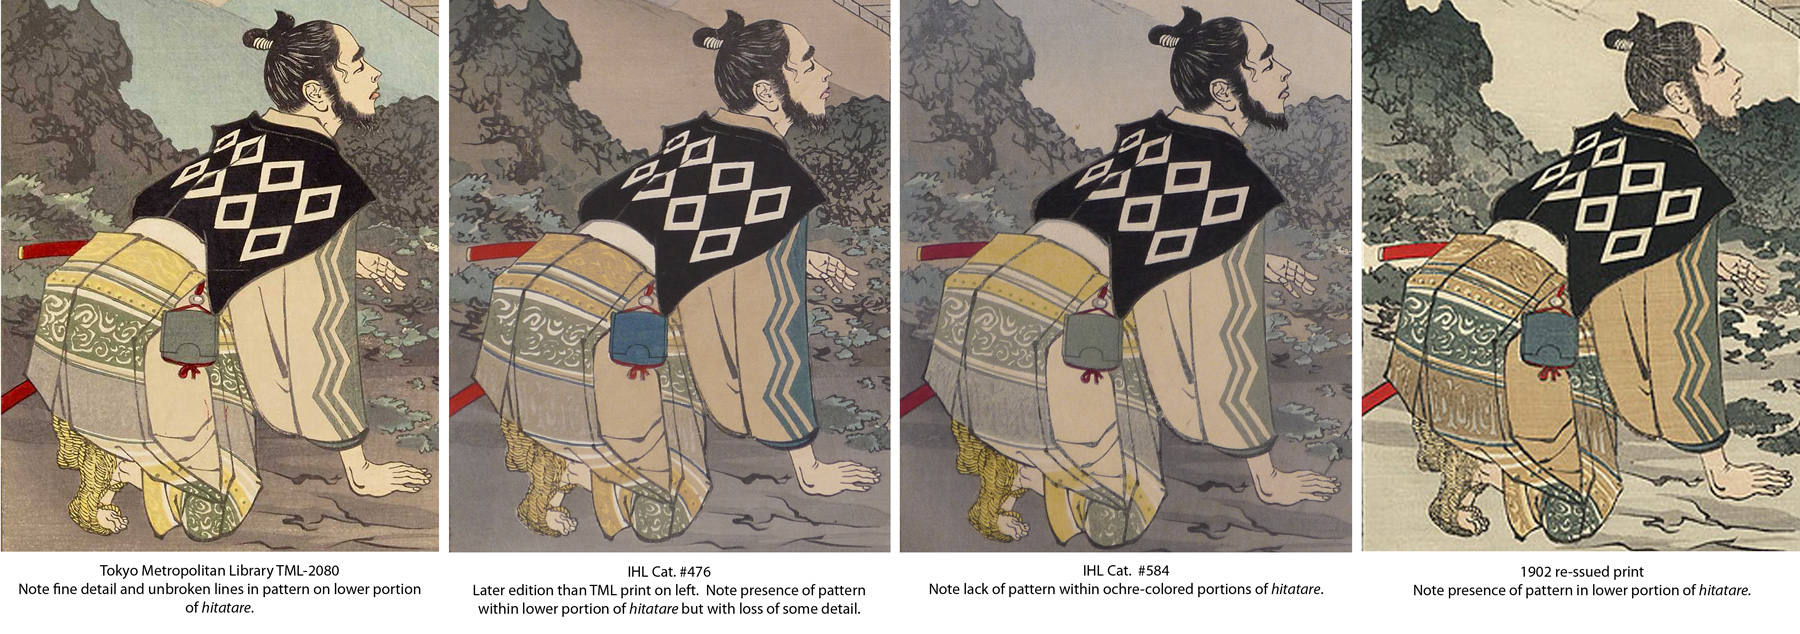 Uesugi Kagetora From The Series Instructive Models Of Lofty Ambition The Lavenberg Collection Of Japanese Prints